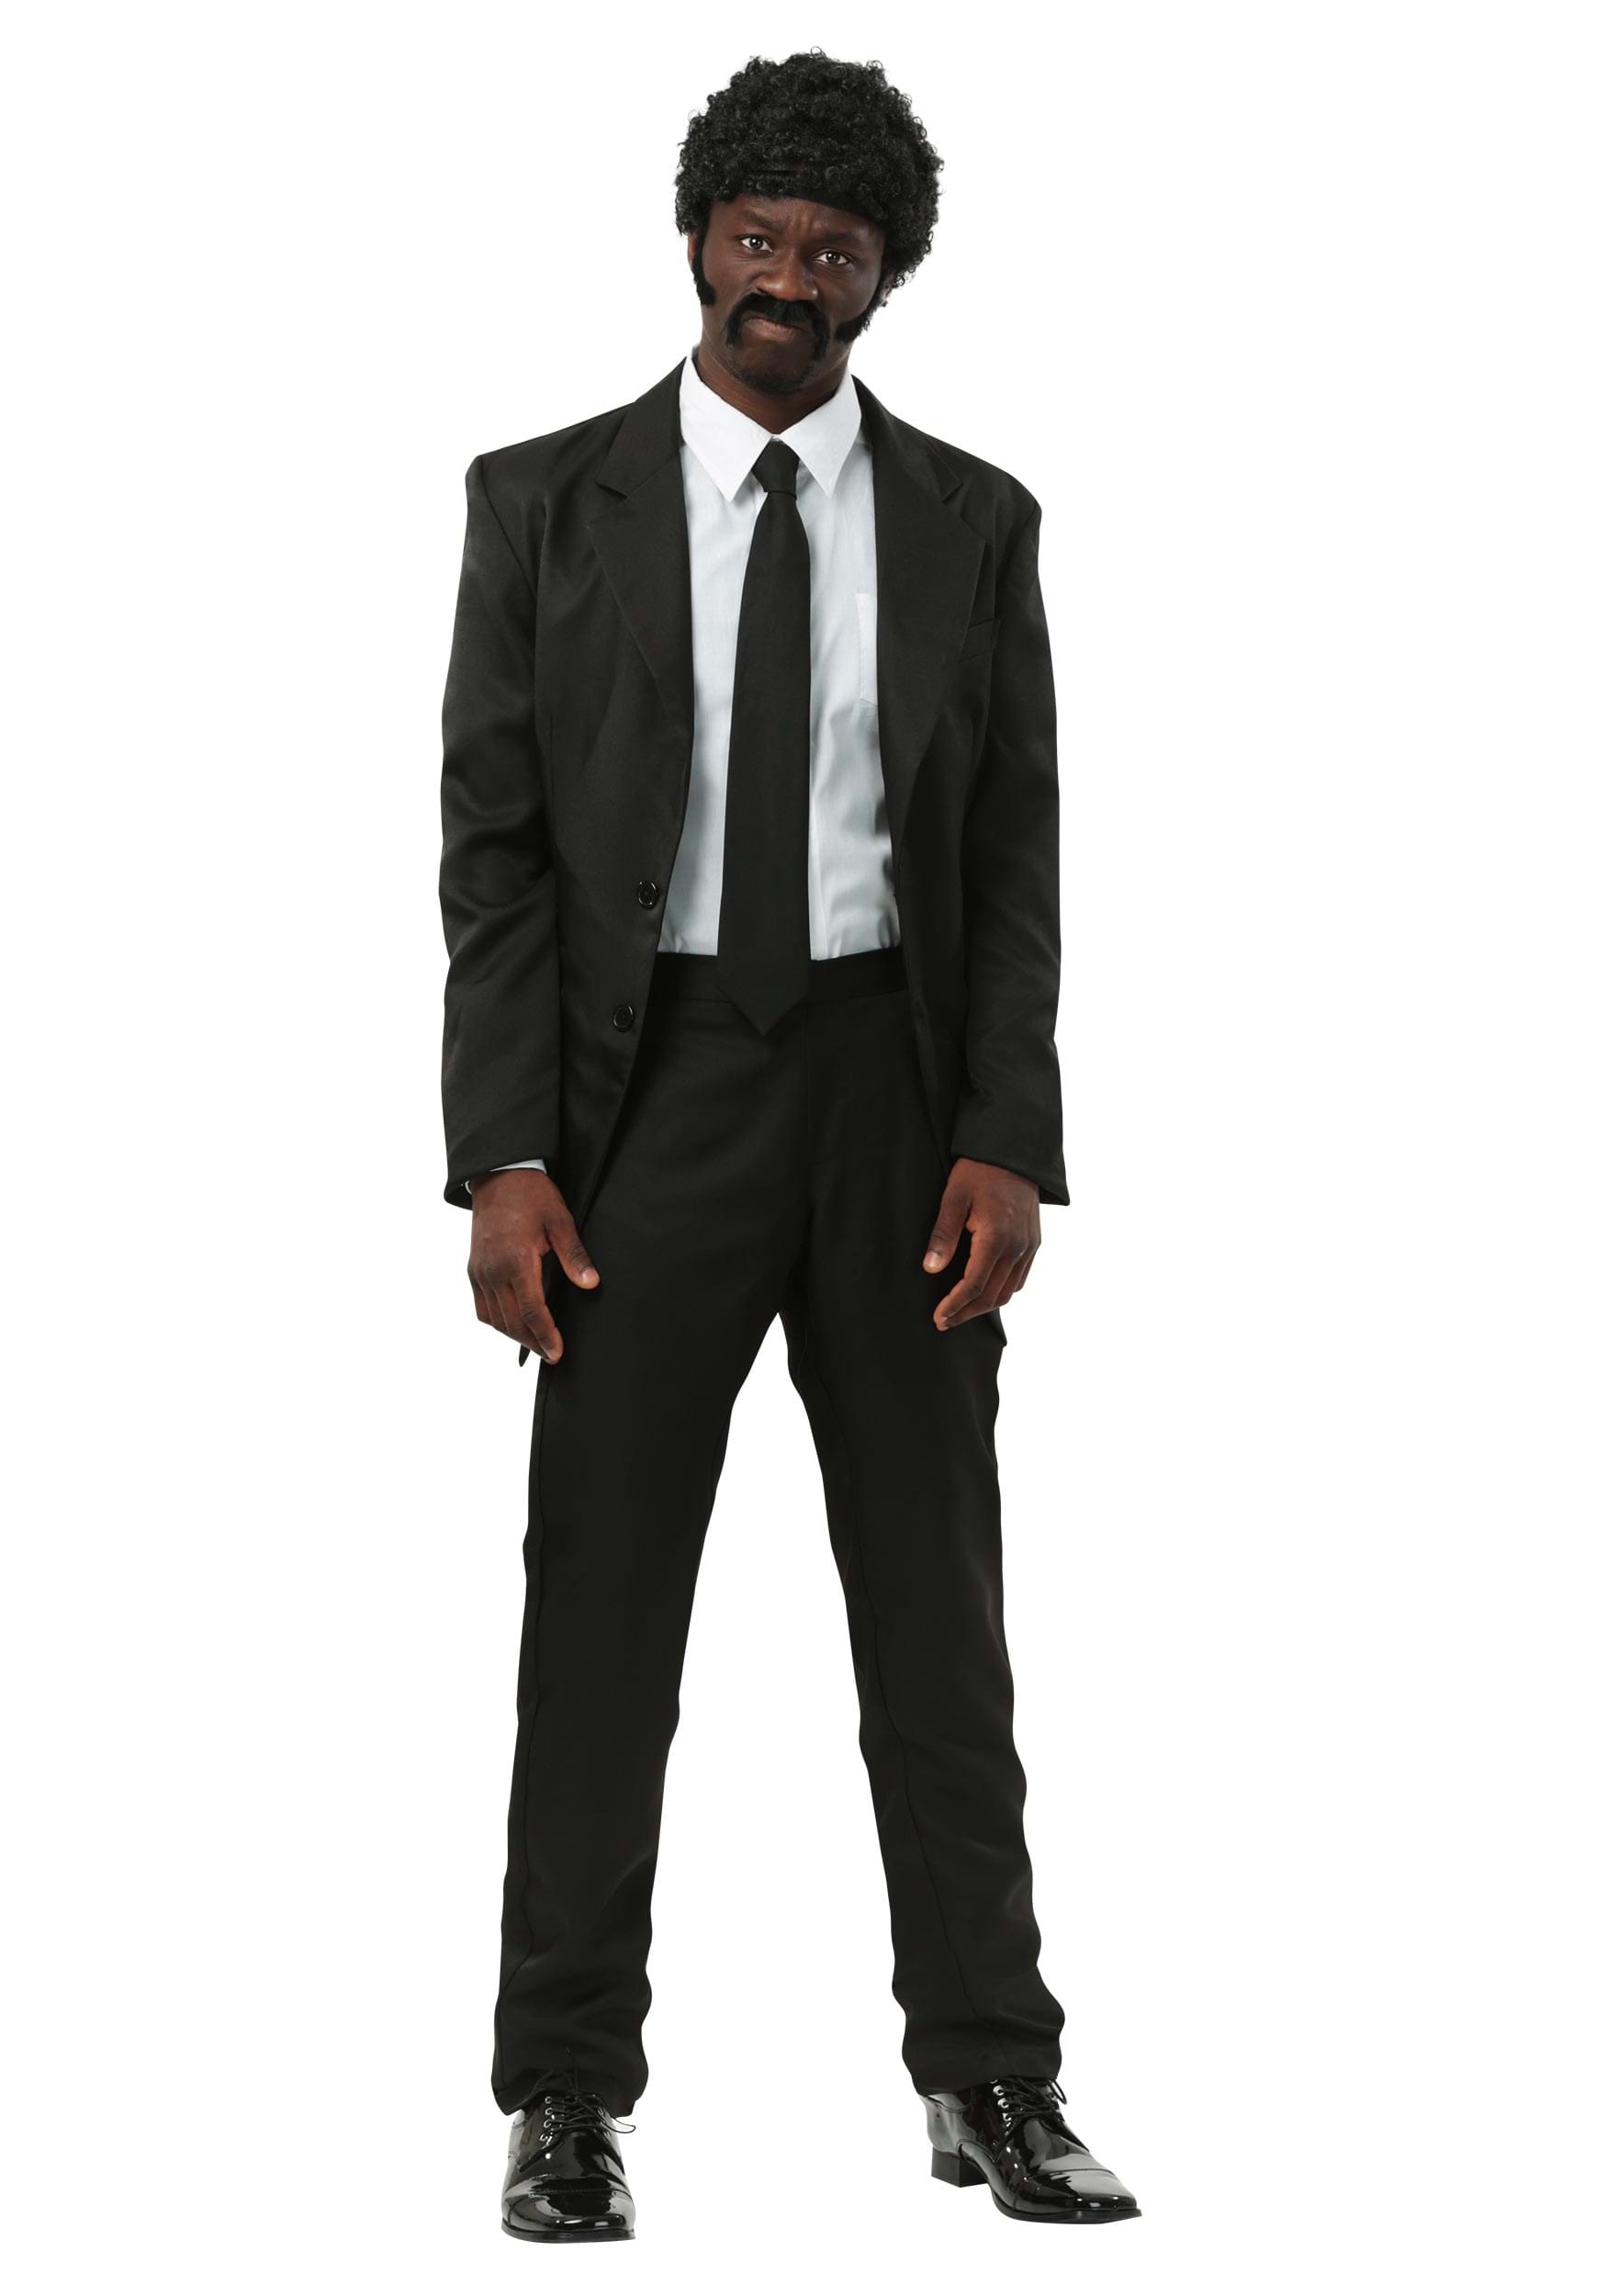 Image of Pulp Fiction Suit Costume for Men ID FUN6635AD-M